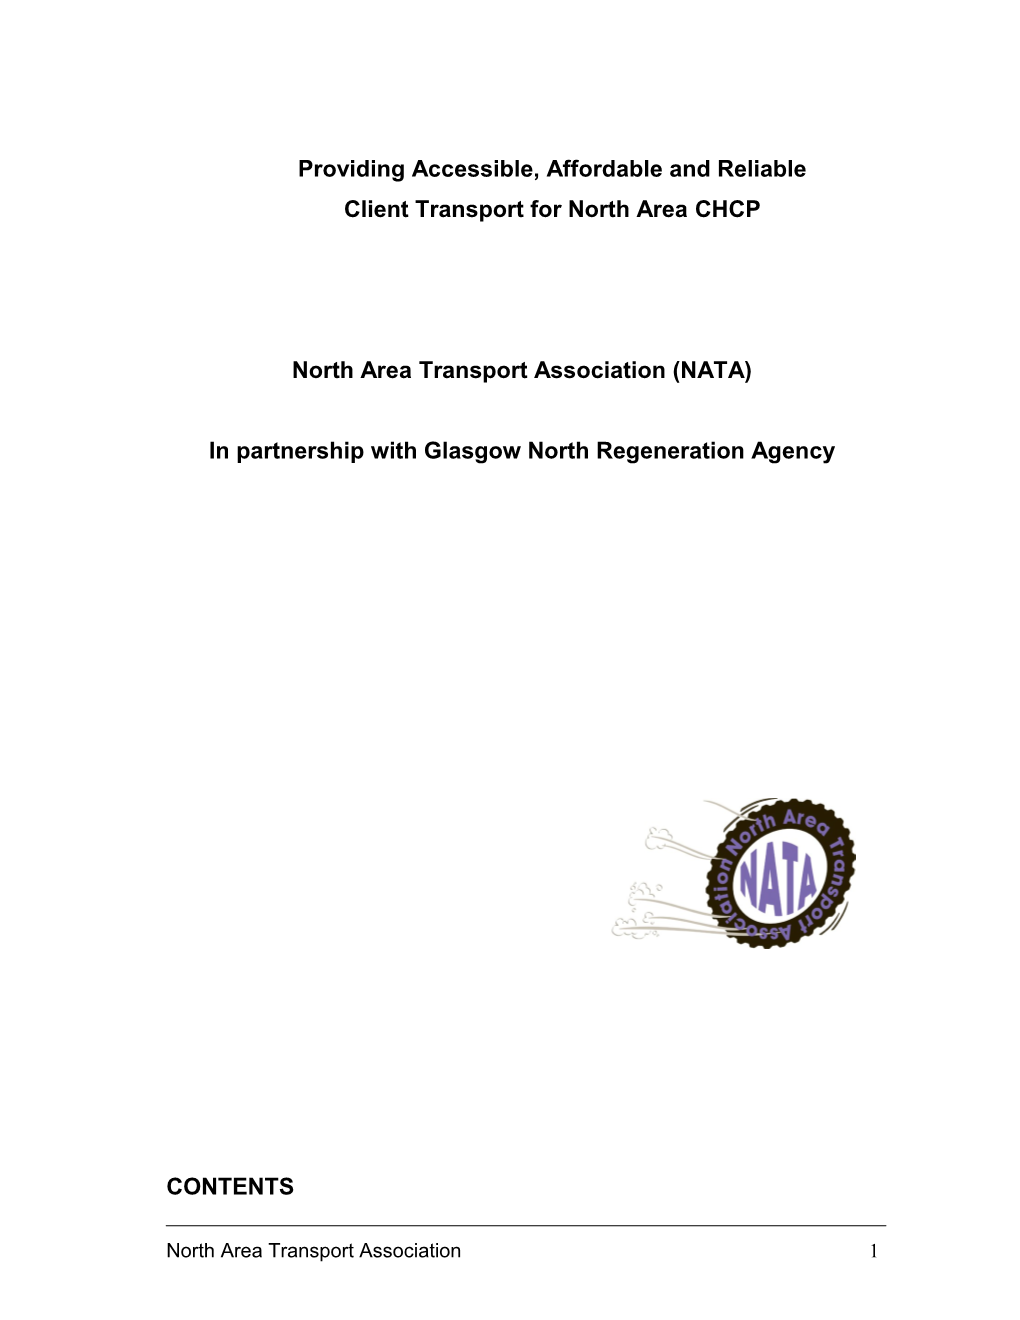 NATA Proposal for Delivery Transport for CHCP